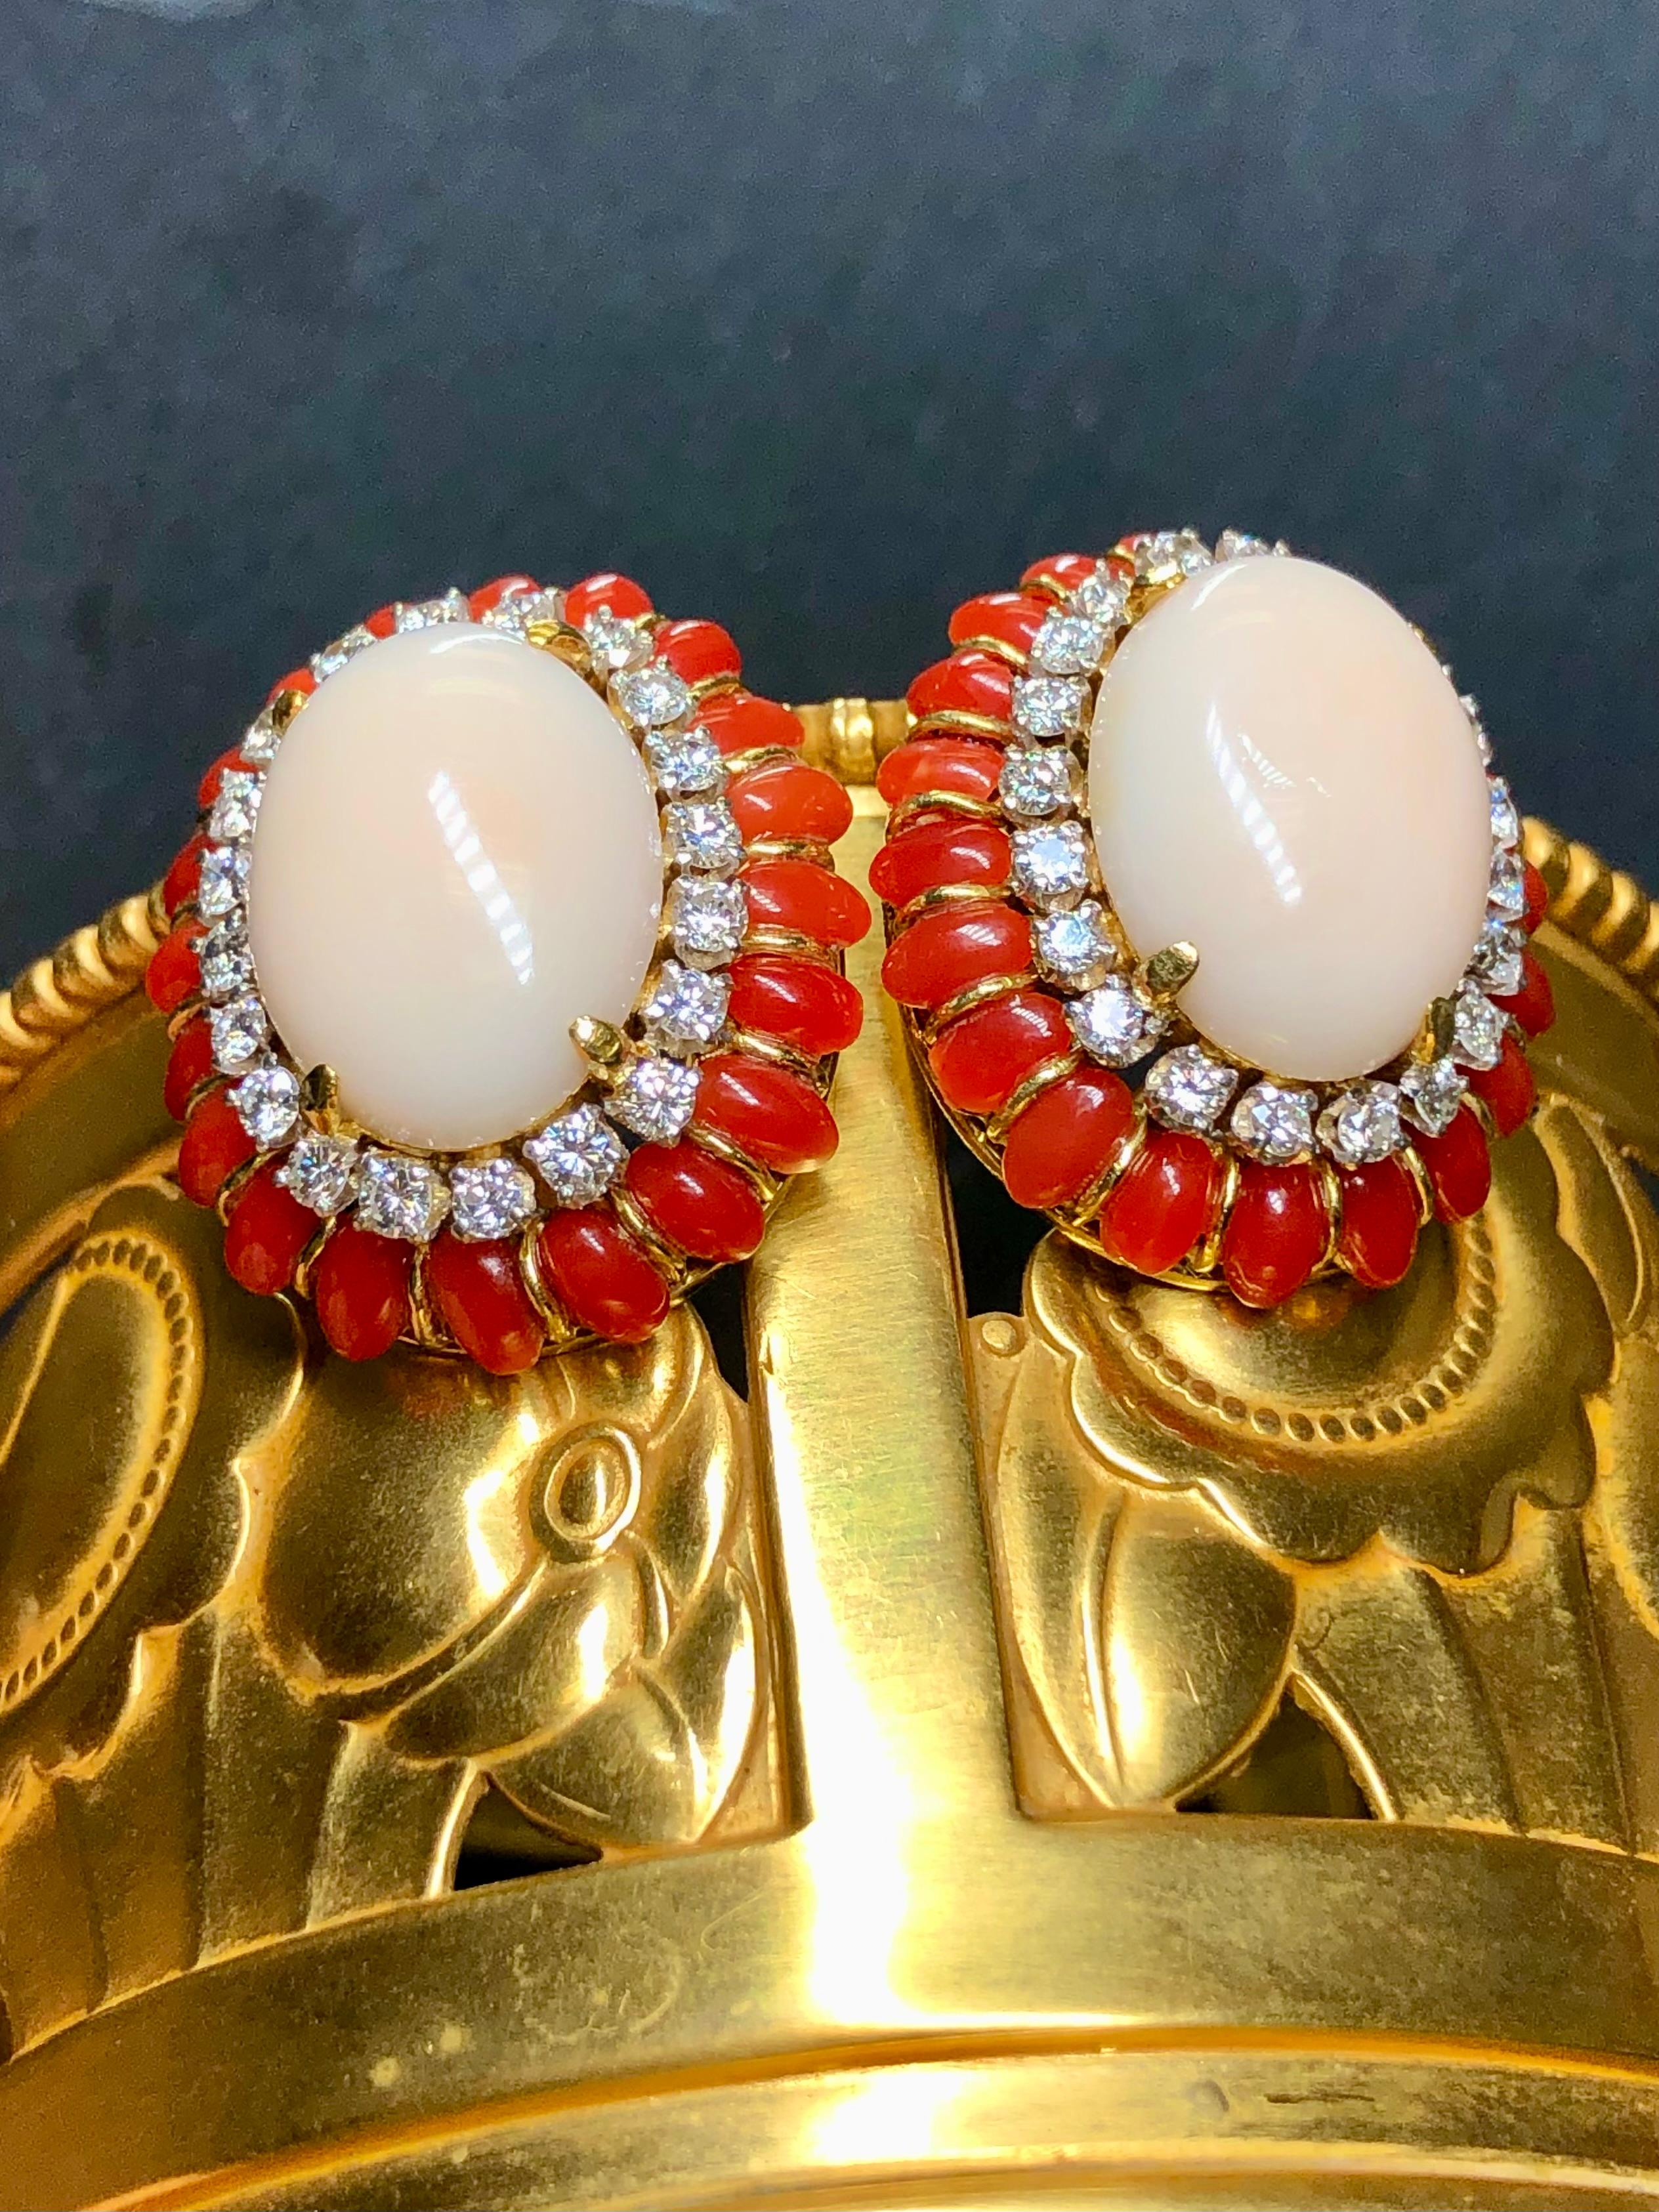 An absolutely stunning pair of earrings c. the late 1960’s done in 18K yellow gold (14K omega backs) with large central angel skin coral cabochons surrounded by smaller, deep red coral cabochons. In between the coral is approximately 2cttw in G-I